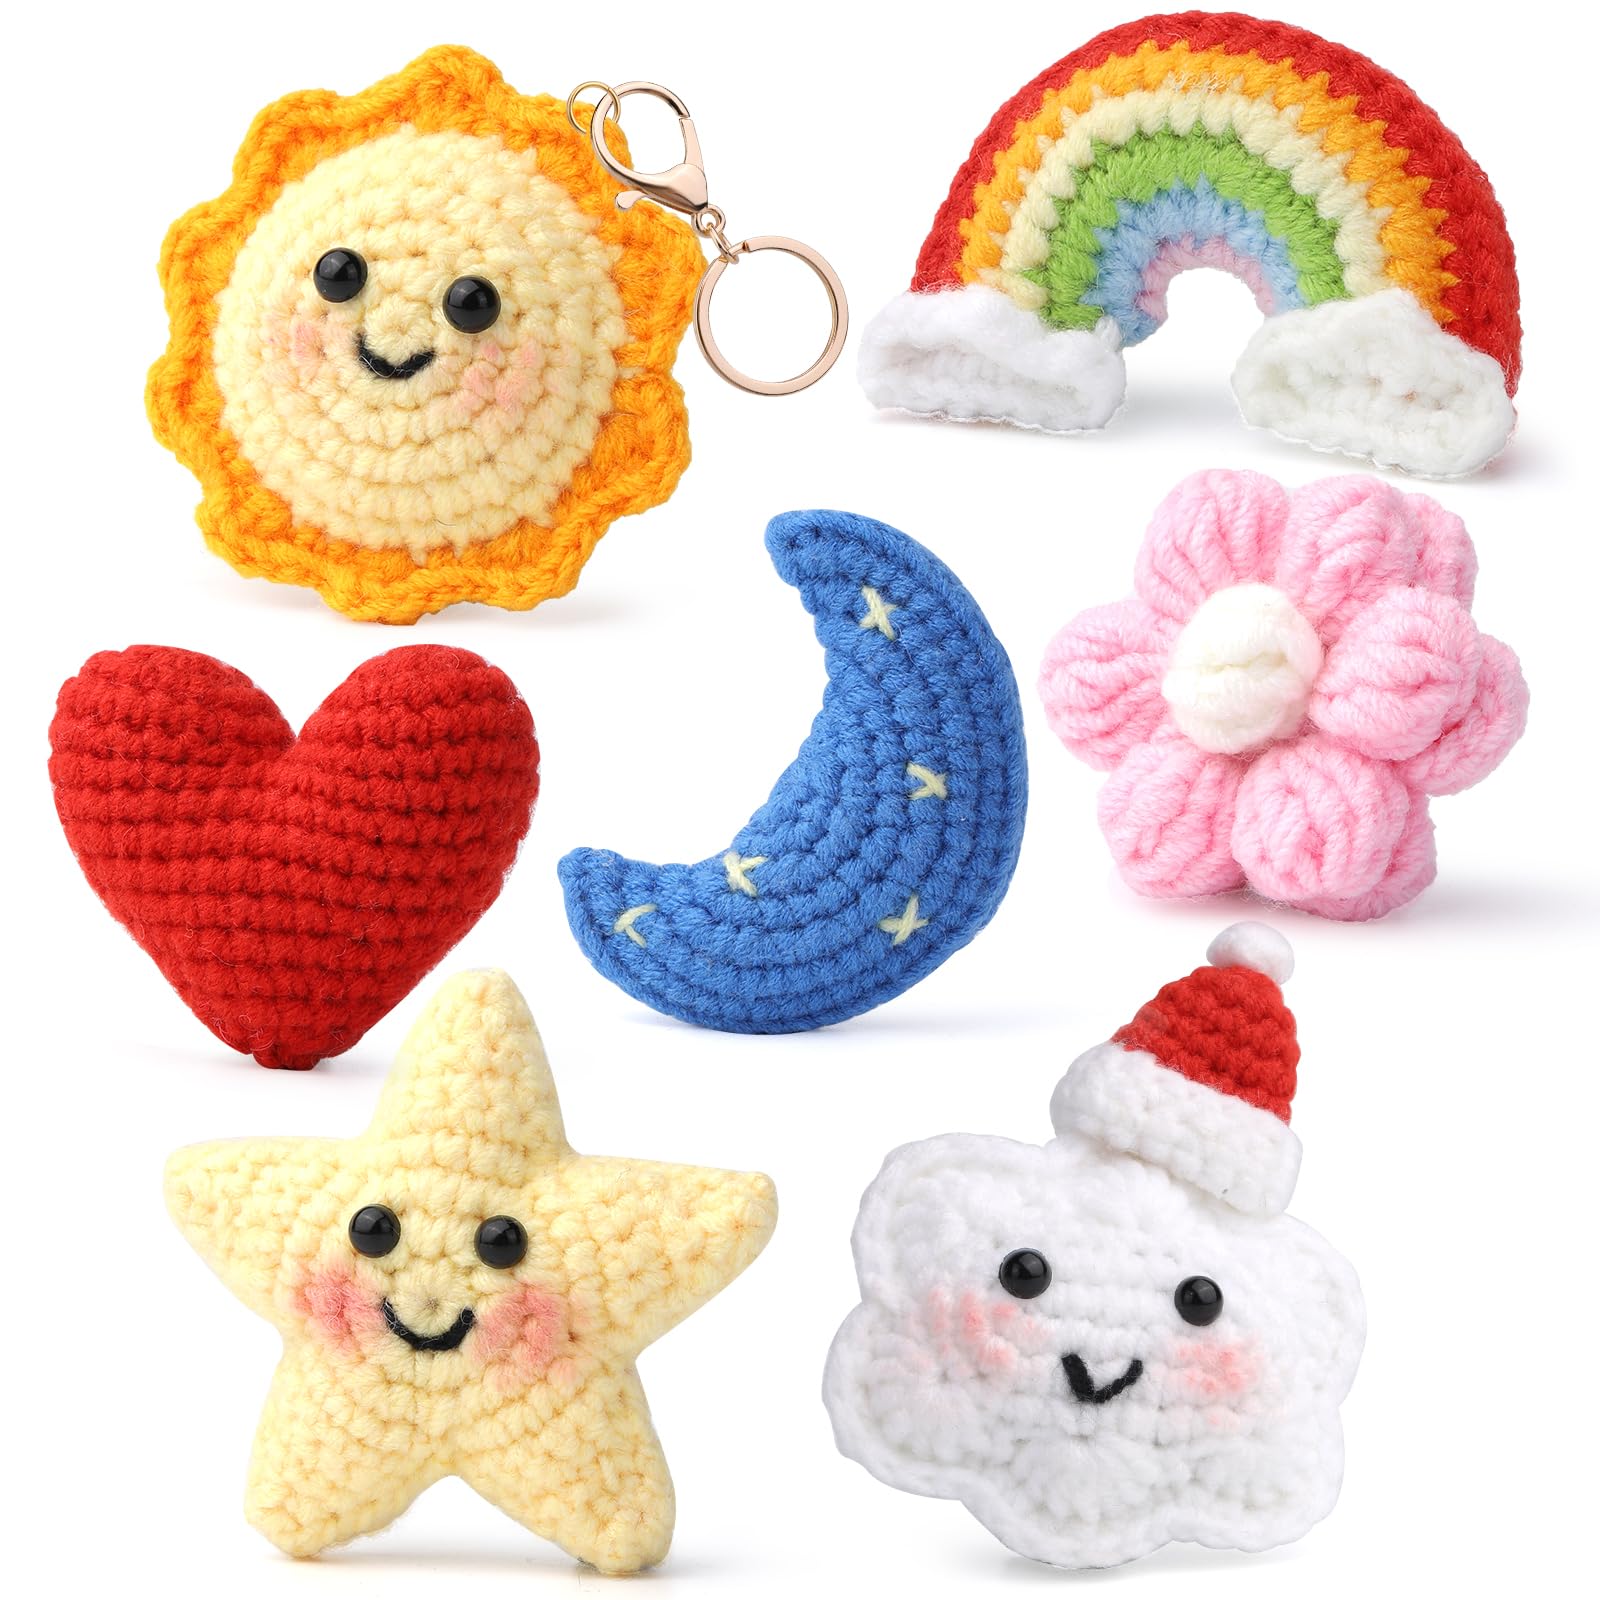 7 PCS Crochet Kit for Beginners, with 10 Colors of Yarn –